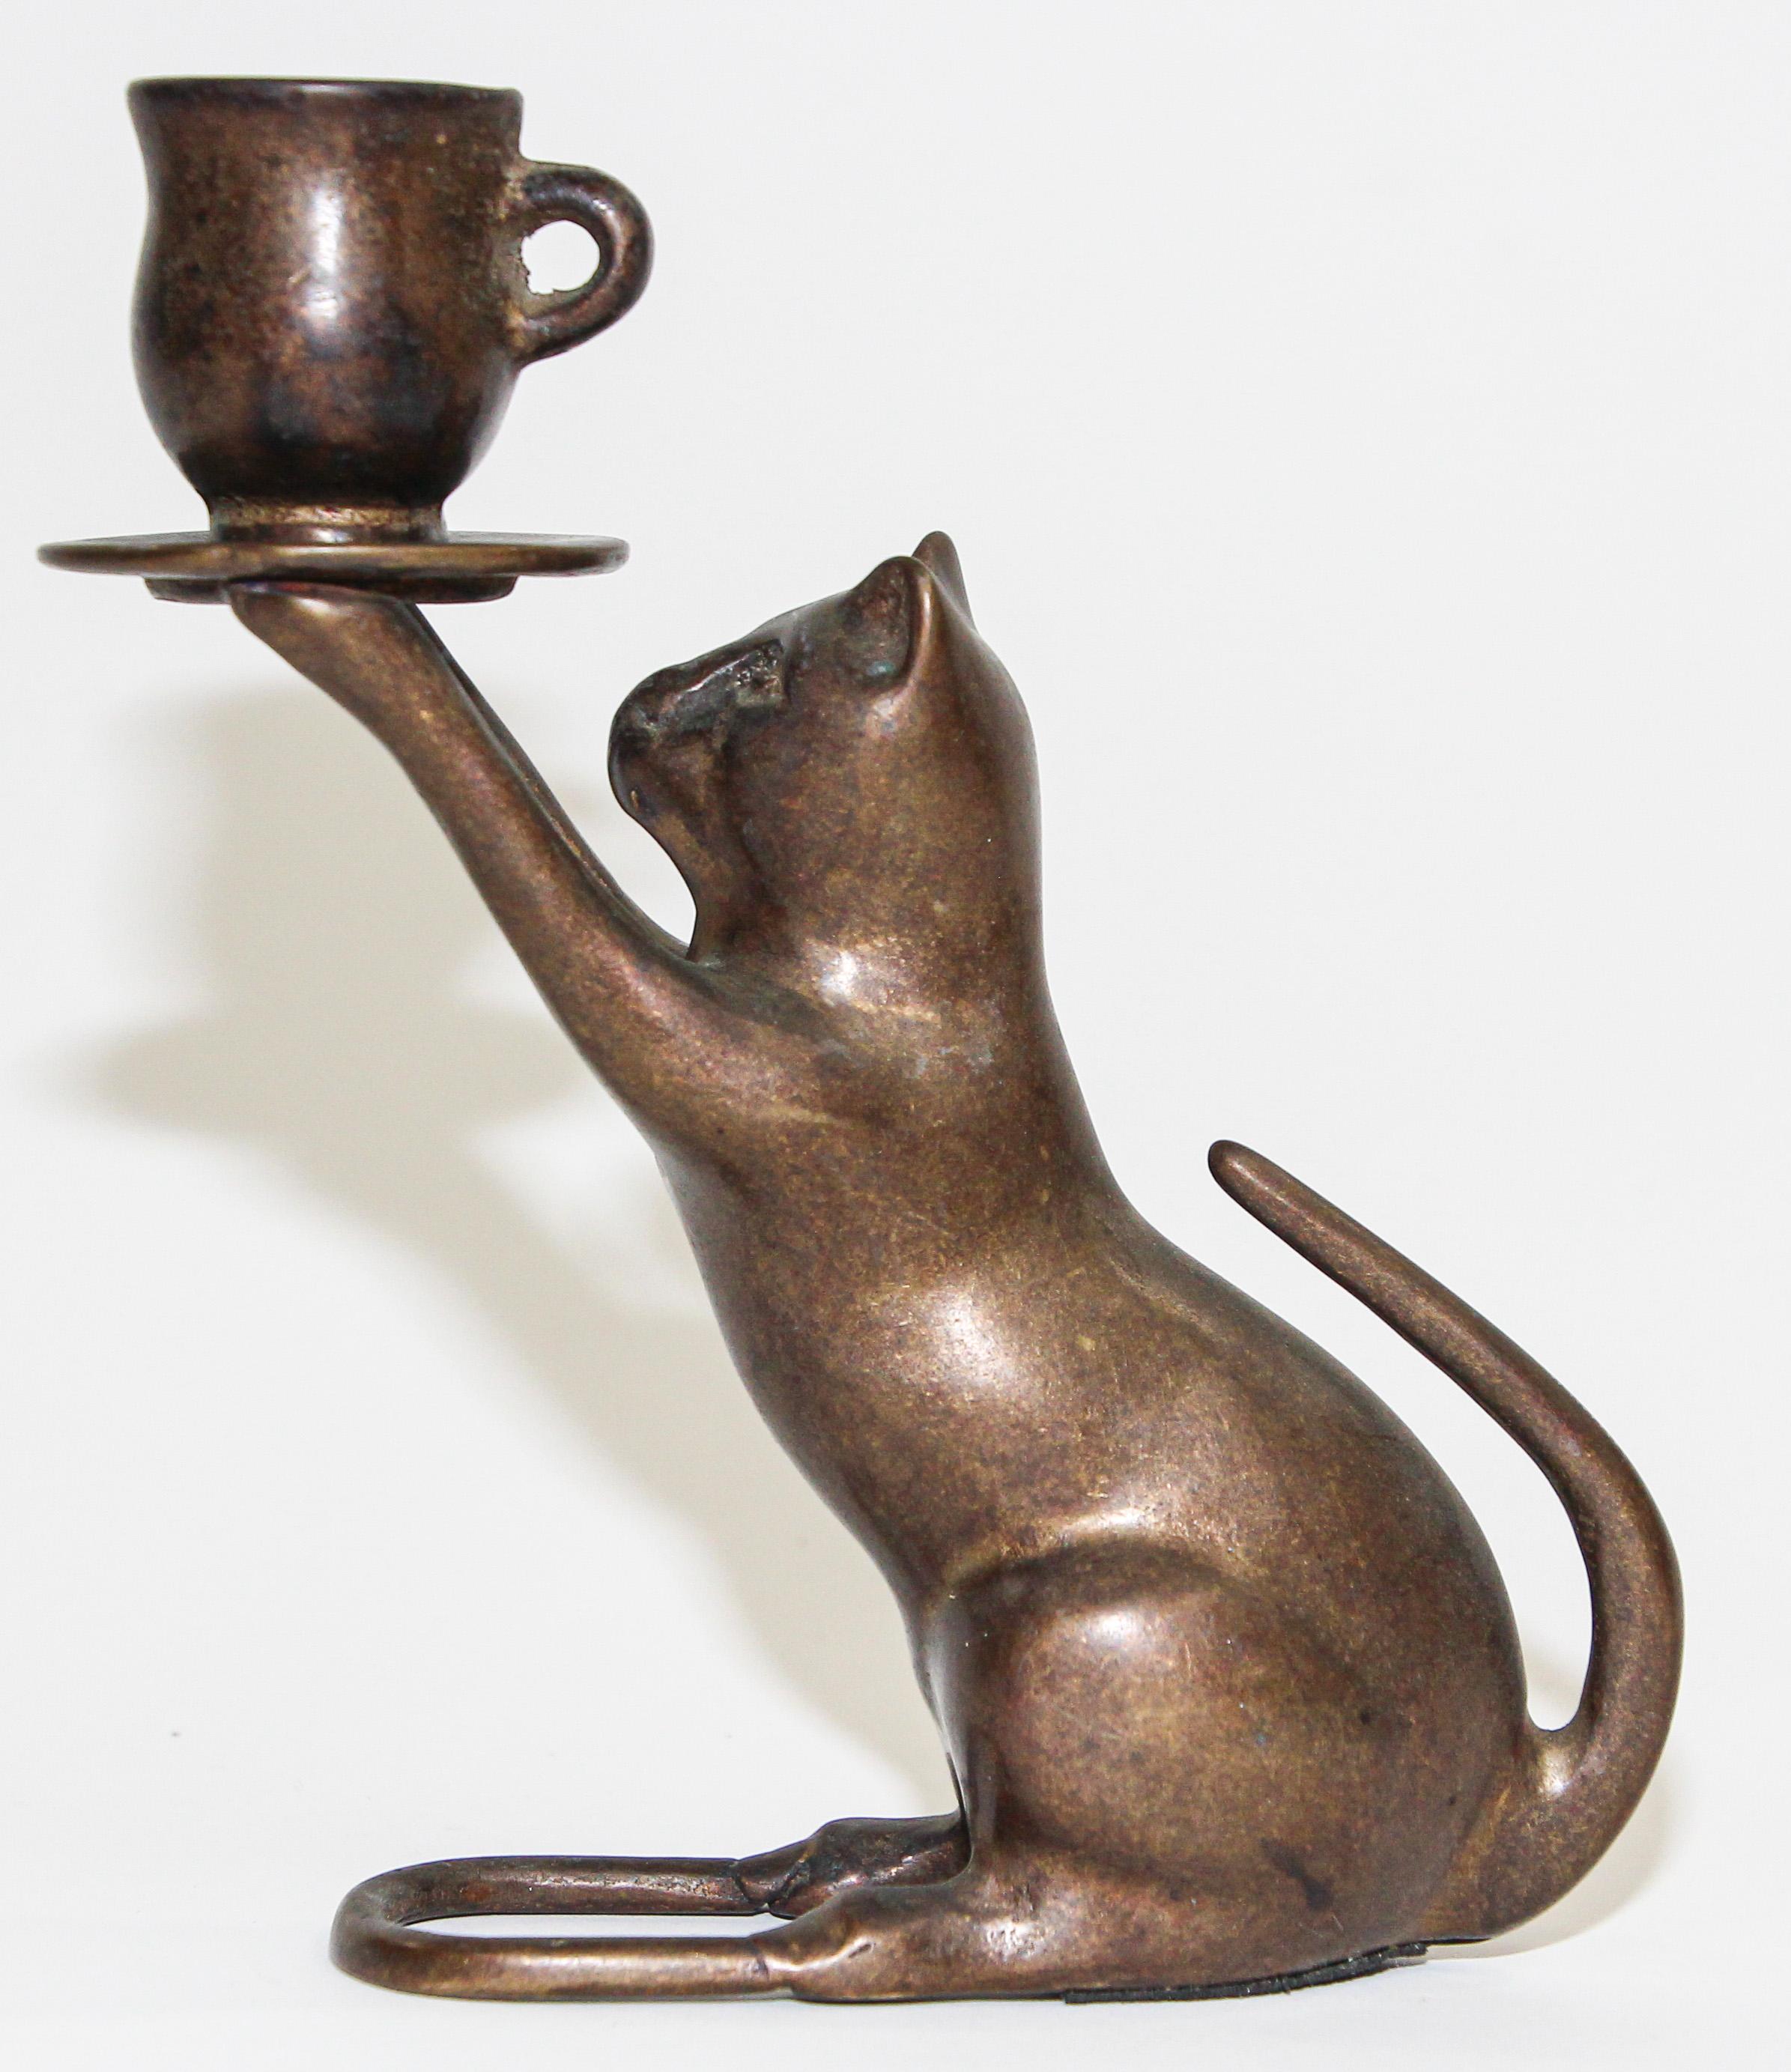 Small Art Deco style French bronze candle holder animal cat sculpture.
Patinated bronze candle holder in the style of Egyptian Revival figure of a standing cat holding a a cup candle holder
Small French bronze candle holder in the form of a cat